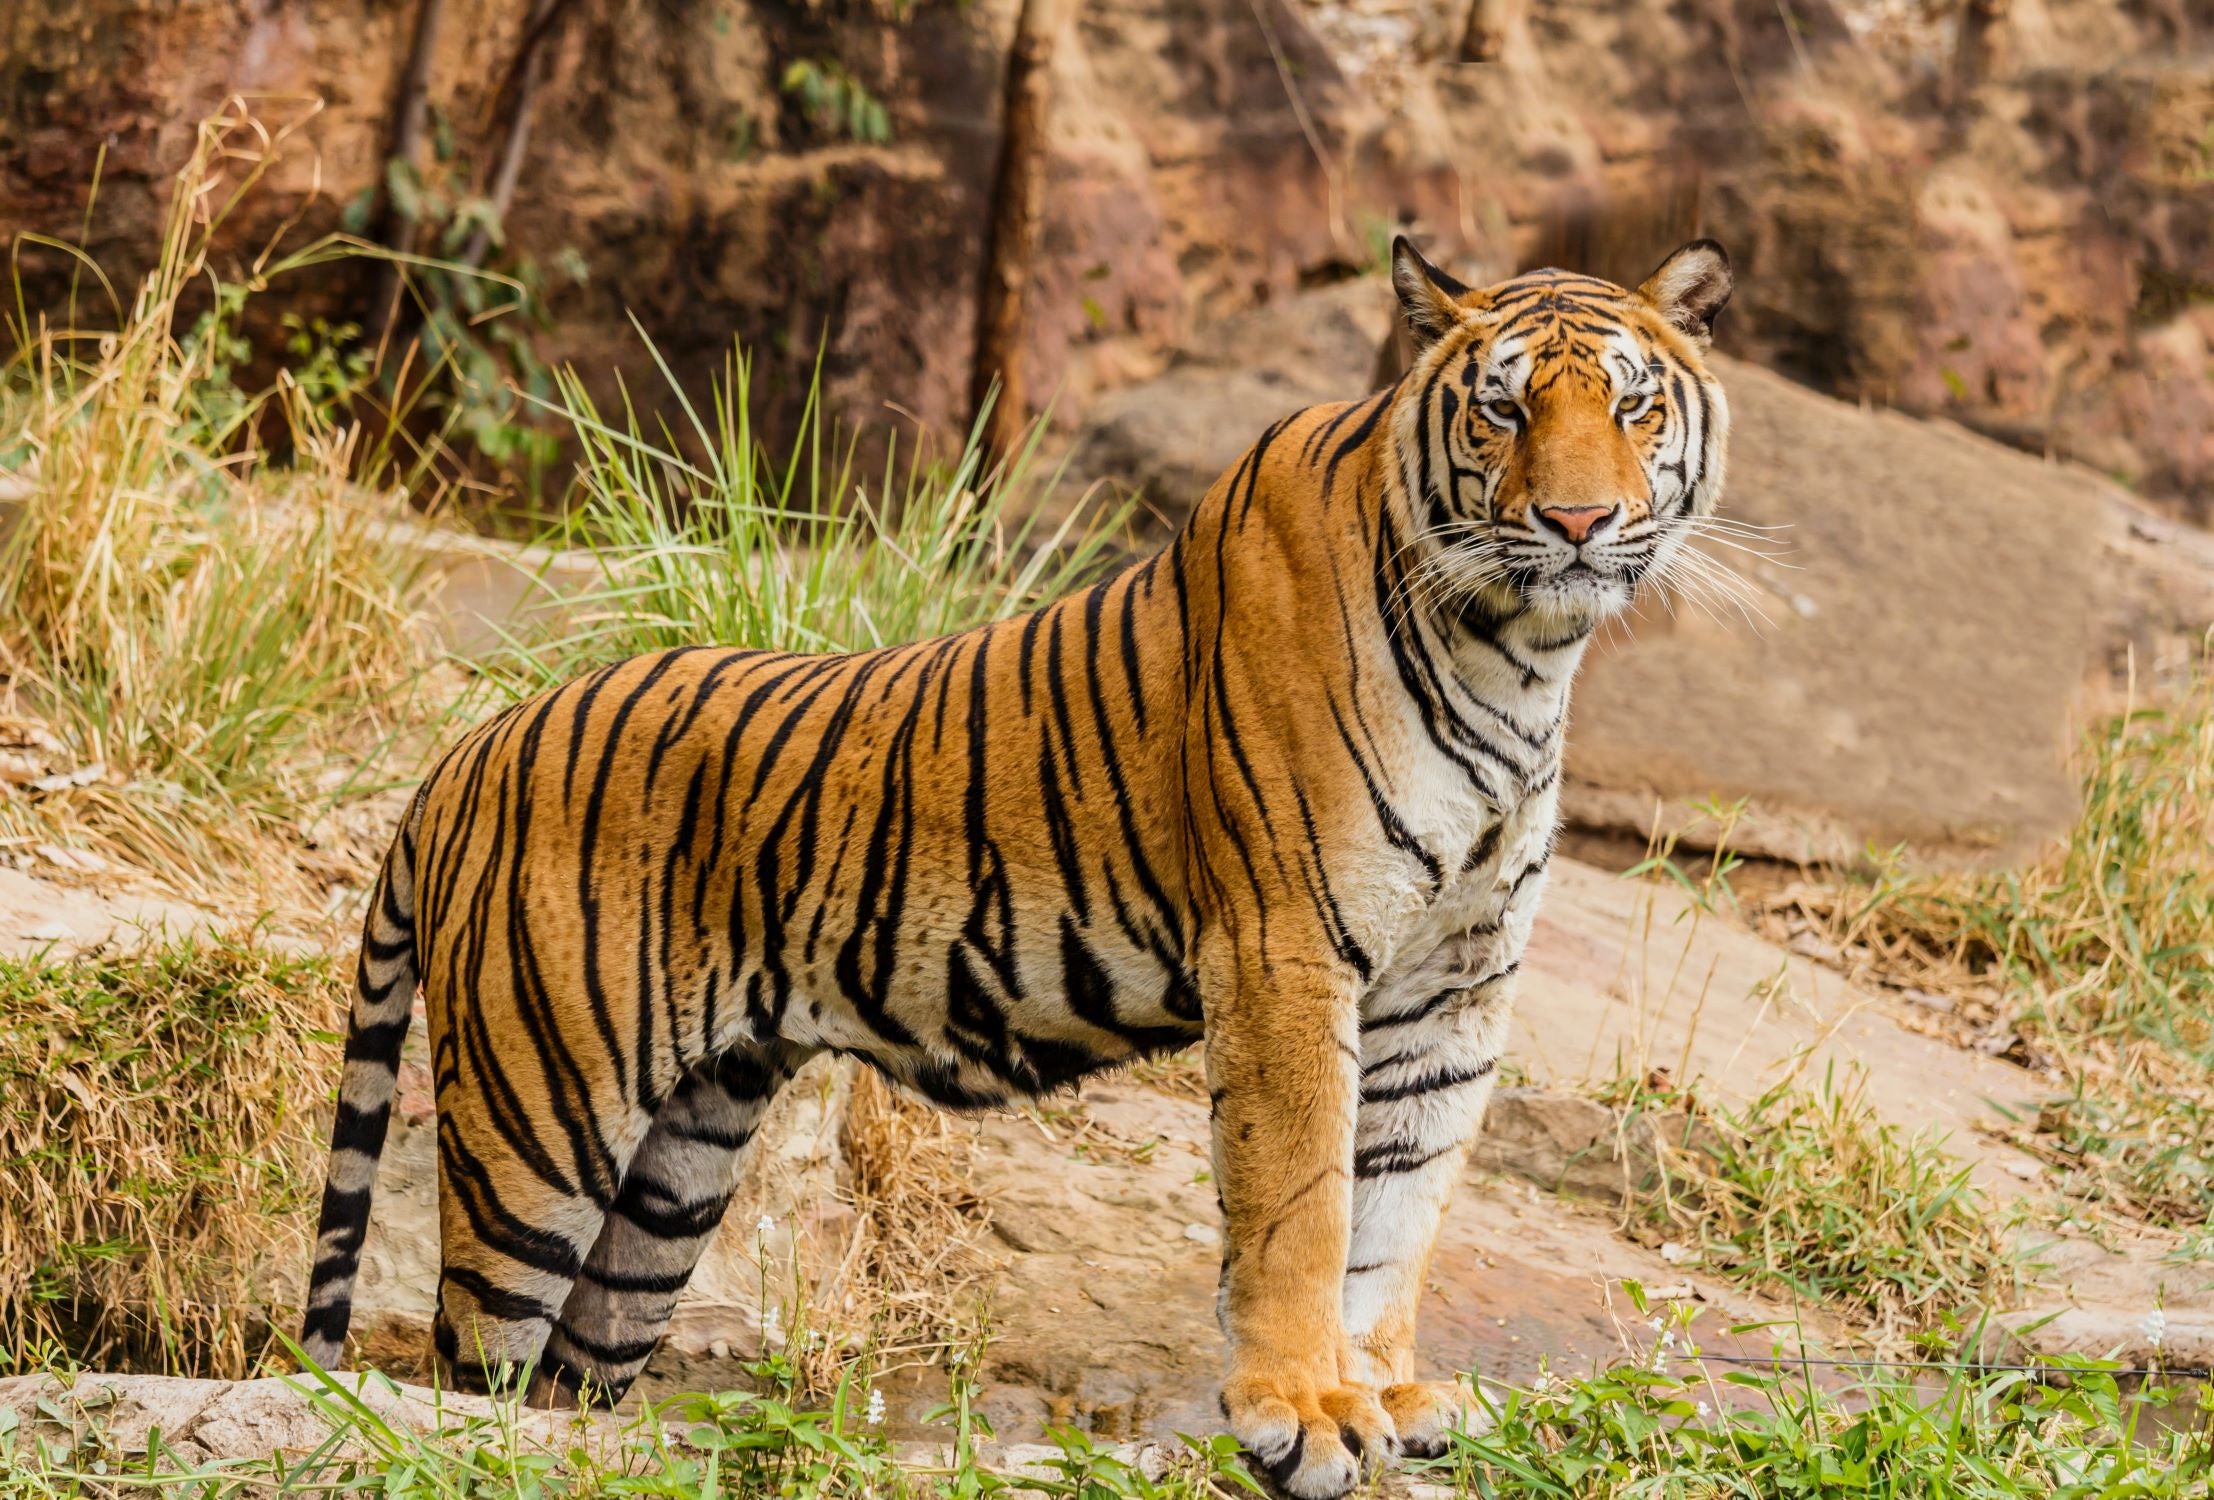 Tiger standing on a rock, to highlight tiger adoption